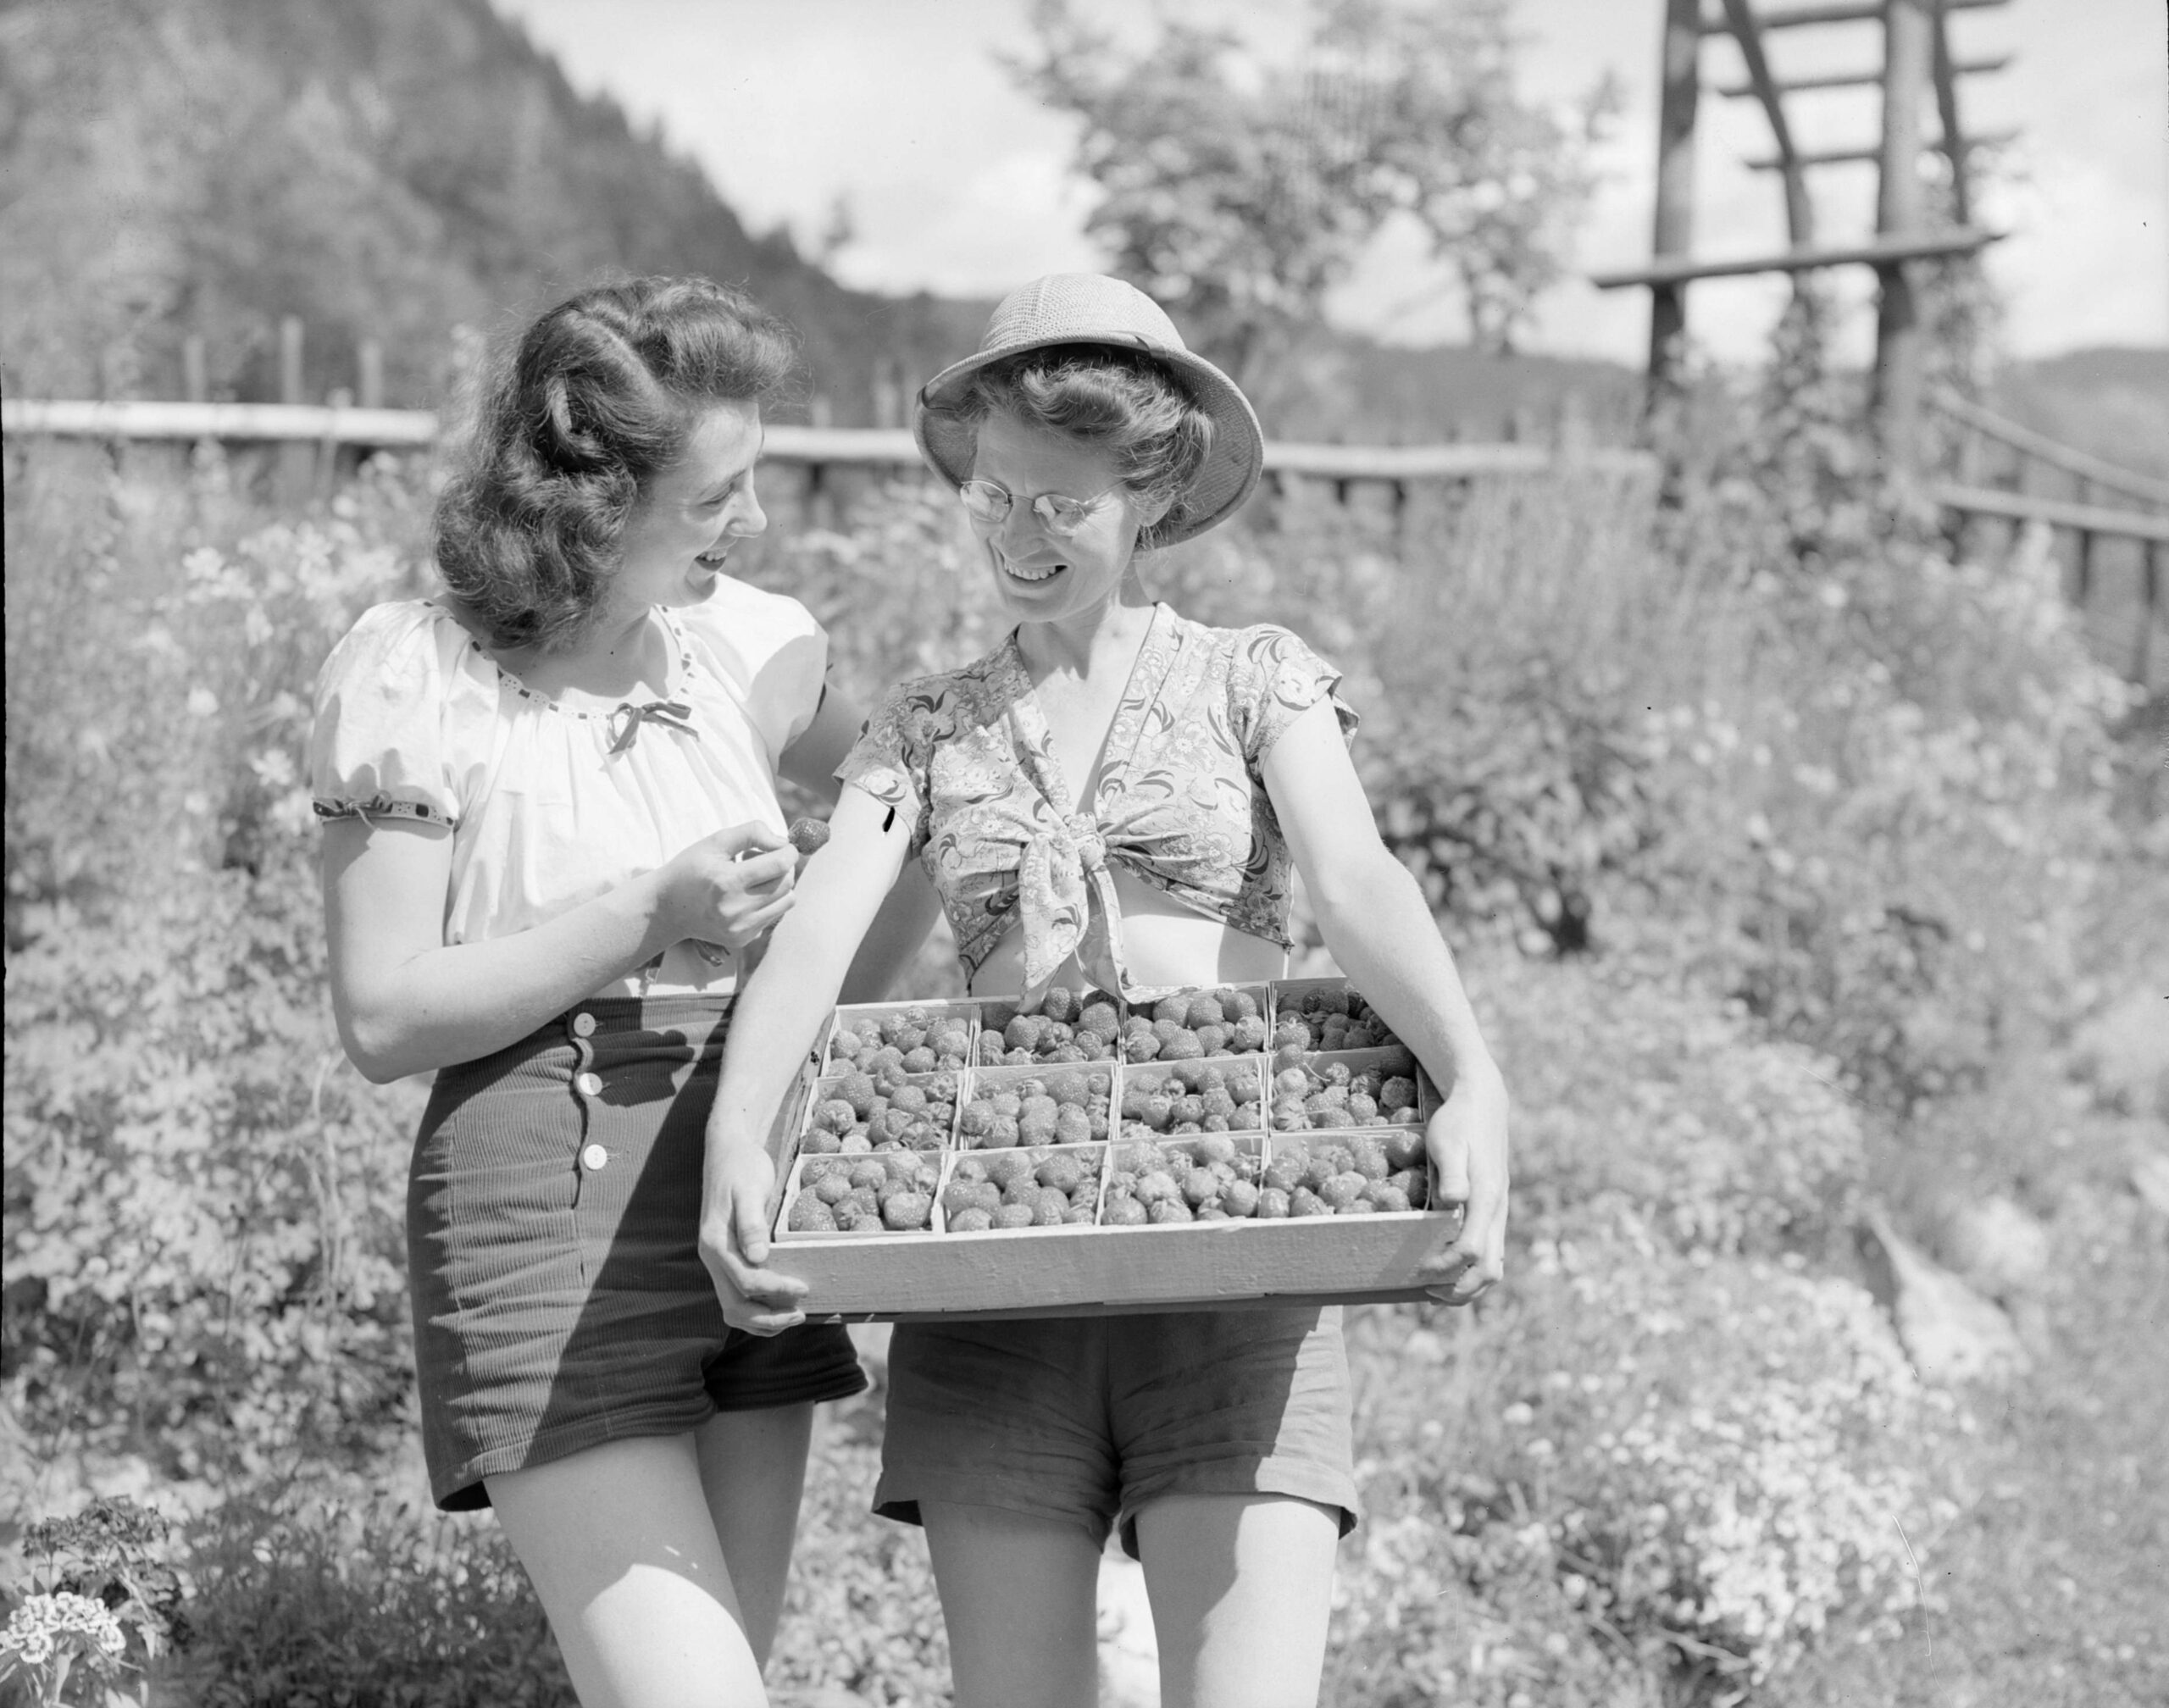 Fred Thompson's daughters with strawberries, Spuzzum, B.C., June 1947. Reference code: AM1545-S3 : CVA 586-15768